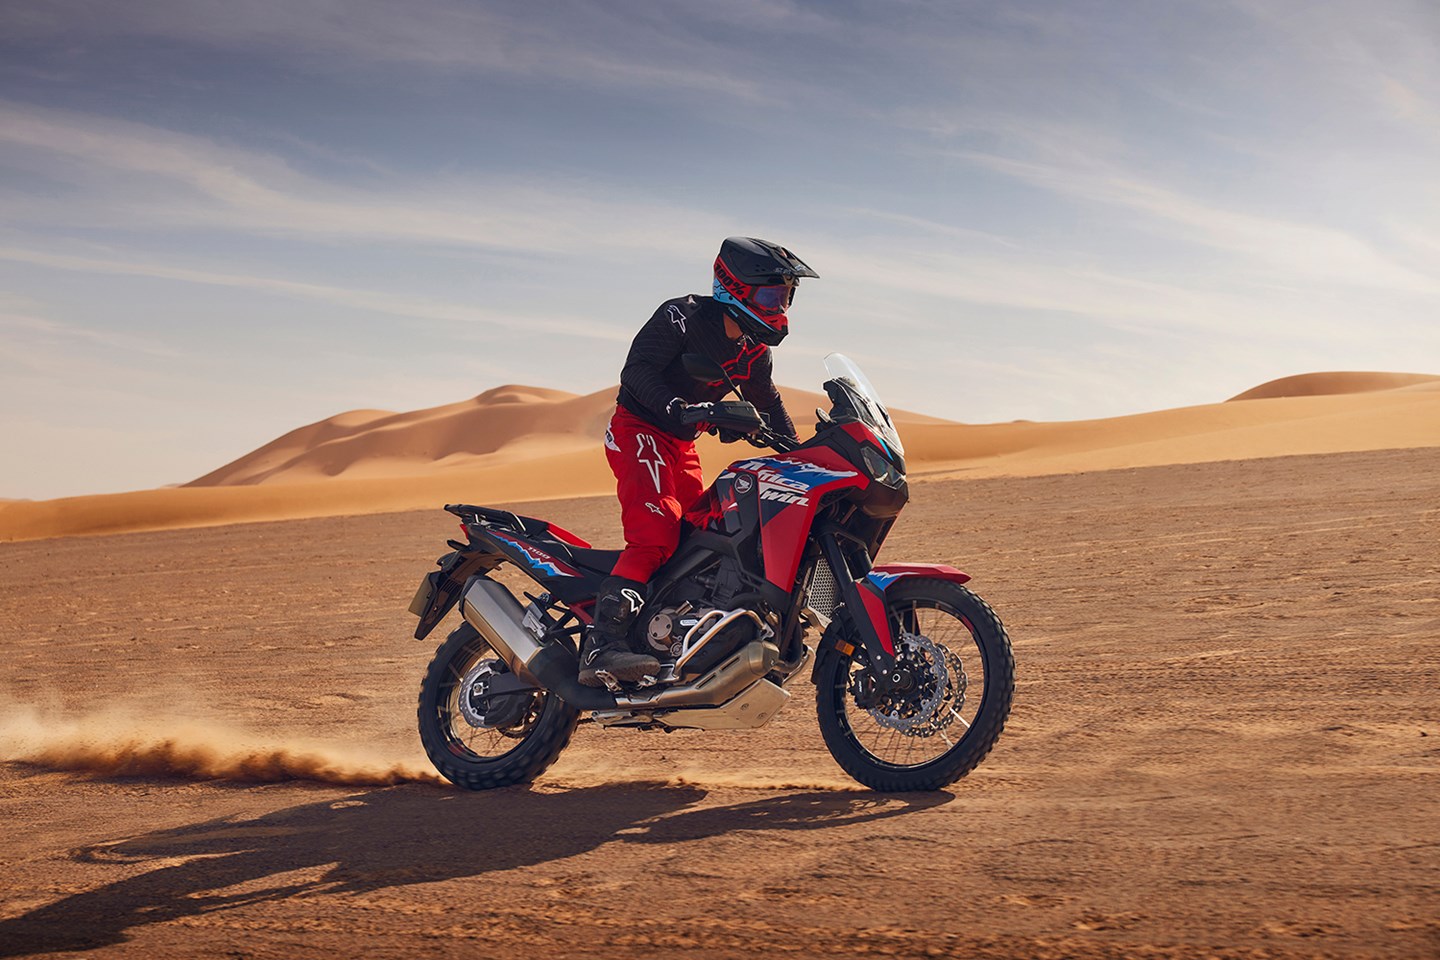 Honda update popular Africa Twin adventure range with new looks and